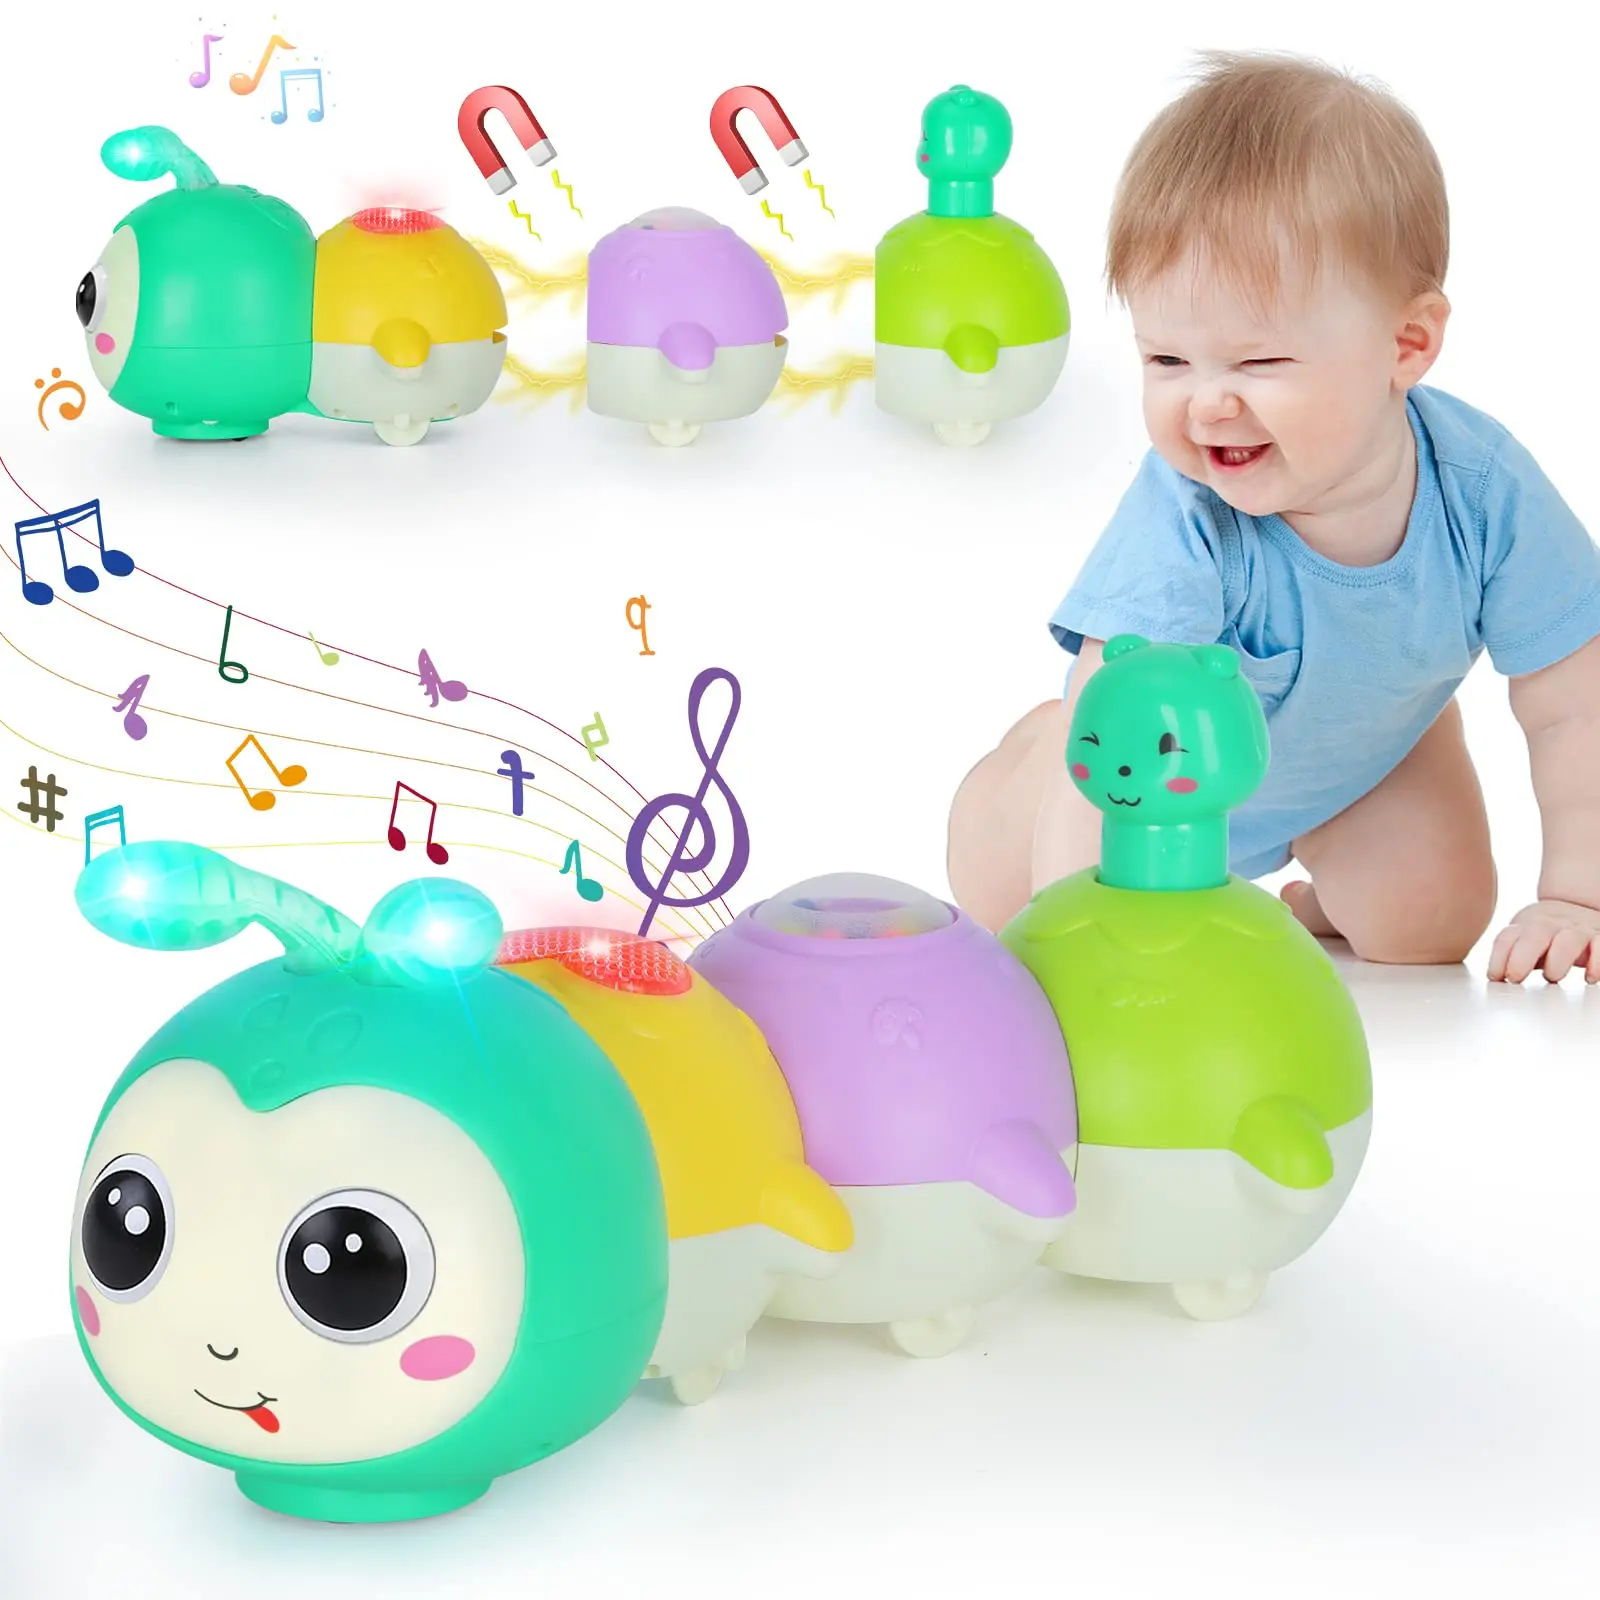 

Baby Crawling Caterpillar Musical Interactive Toy Infant Tummy Time Sensory Early Education Toy with Magnetic Music Light up